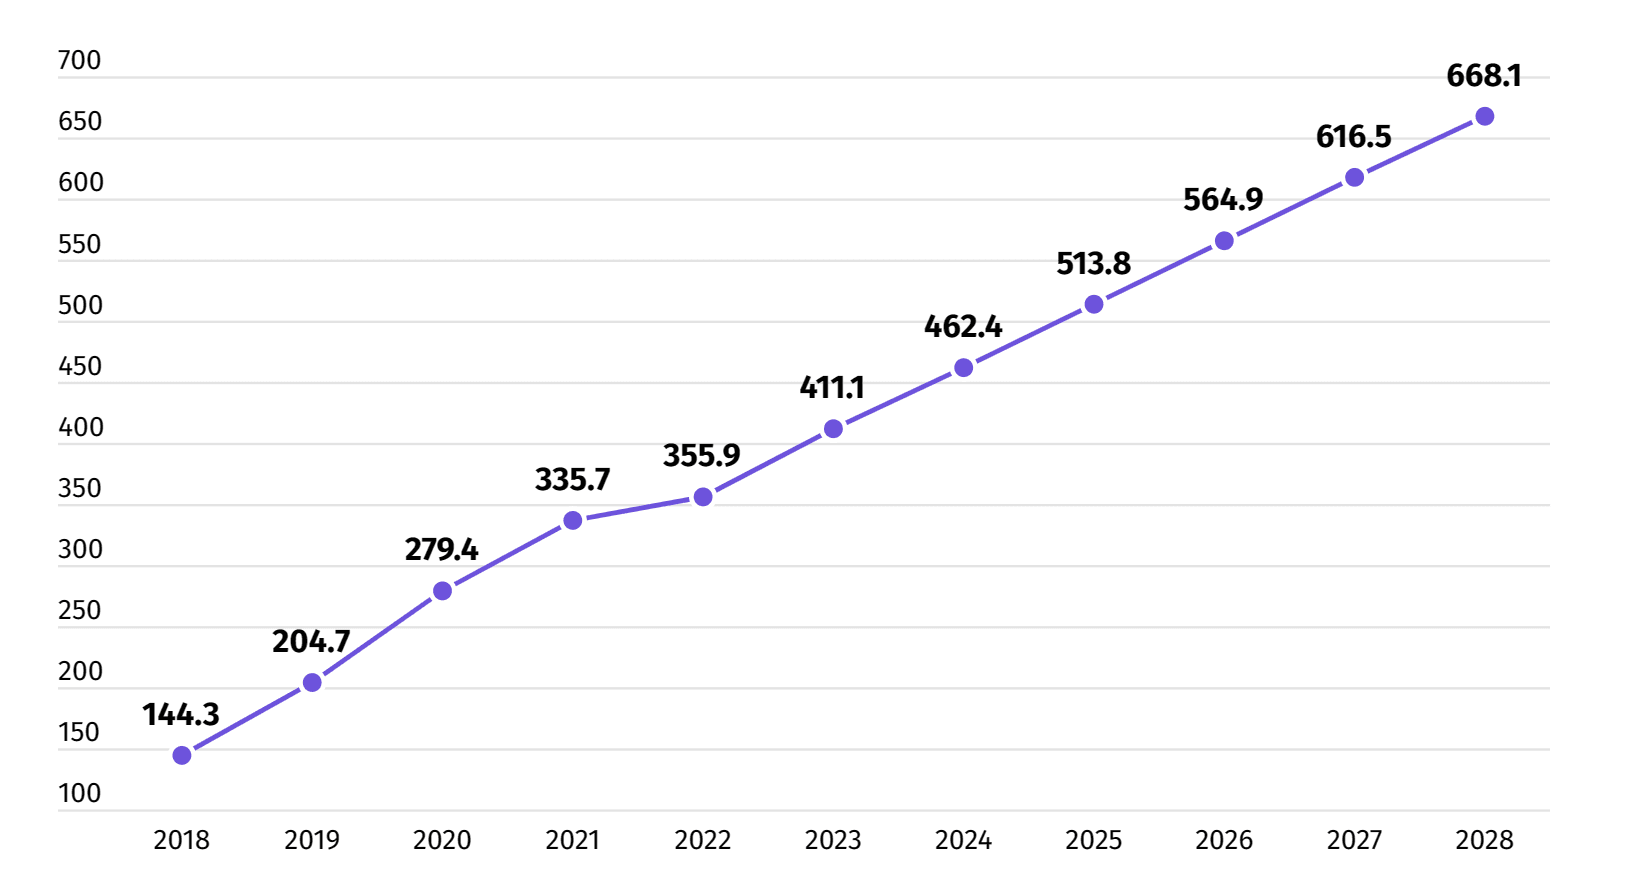 The number of users in the podcast advertising market.png